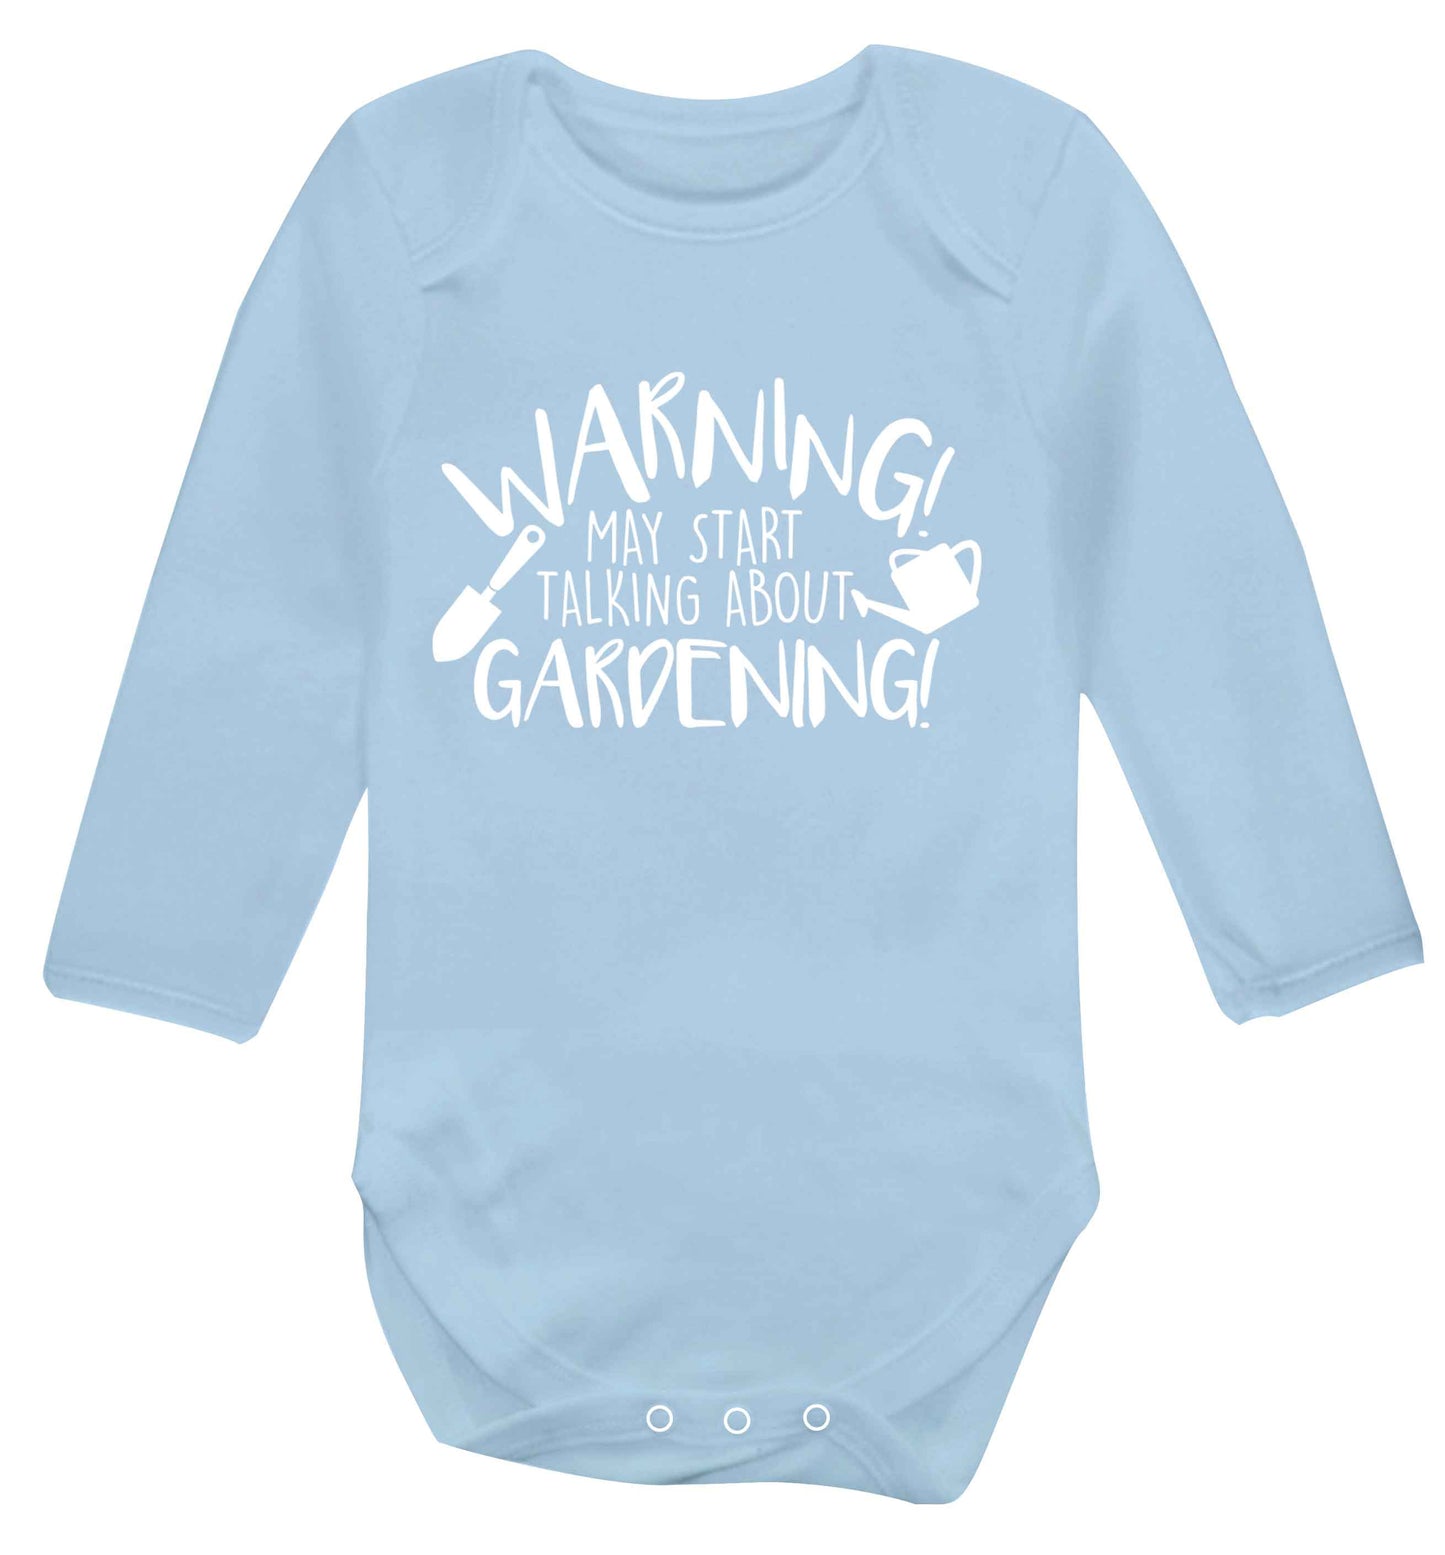 Warning may start talking about gardening Baby Vest long sleeved pale blue 6-12 months